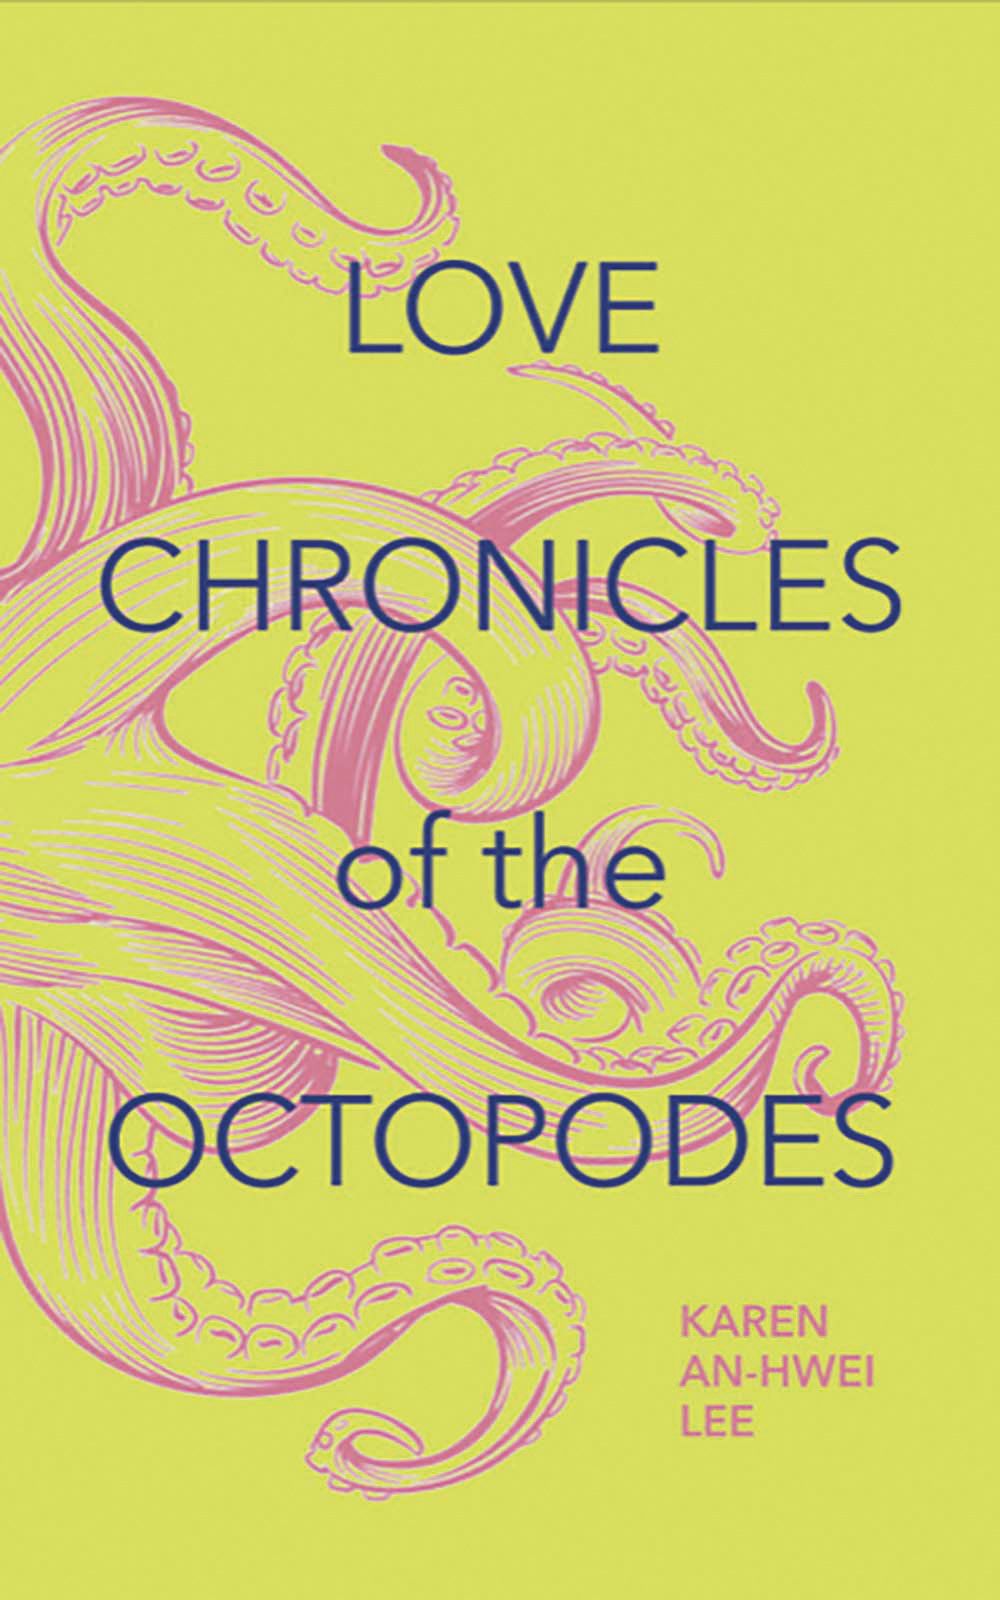 In this sci-fi novel that takes place in a dystopia of unregulated gene editing, Lee chronicles the adventures of Emily D., an octopus infused with the genetic material of poet Emily Dickinson, as she navigates her life in a lagoon as a voiceless cephalopod with a poet’s mind.